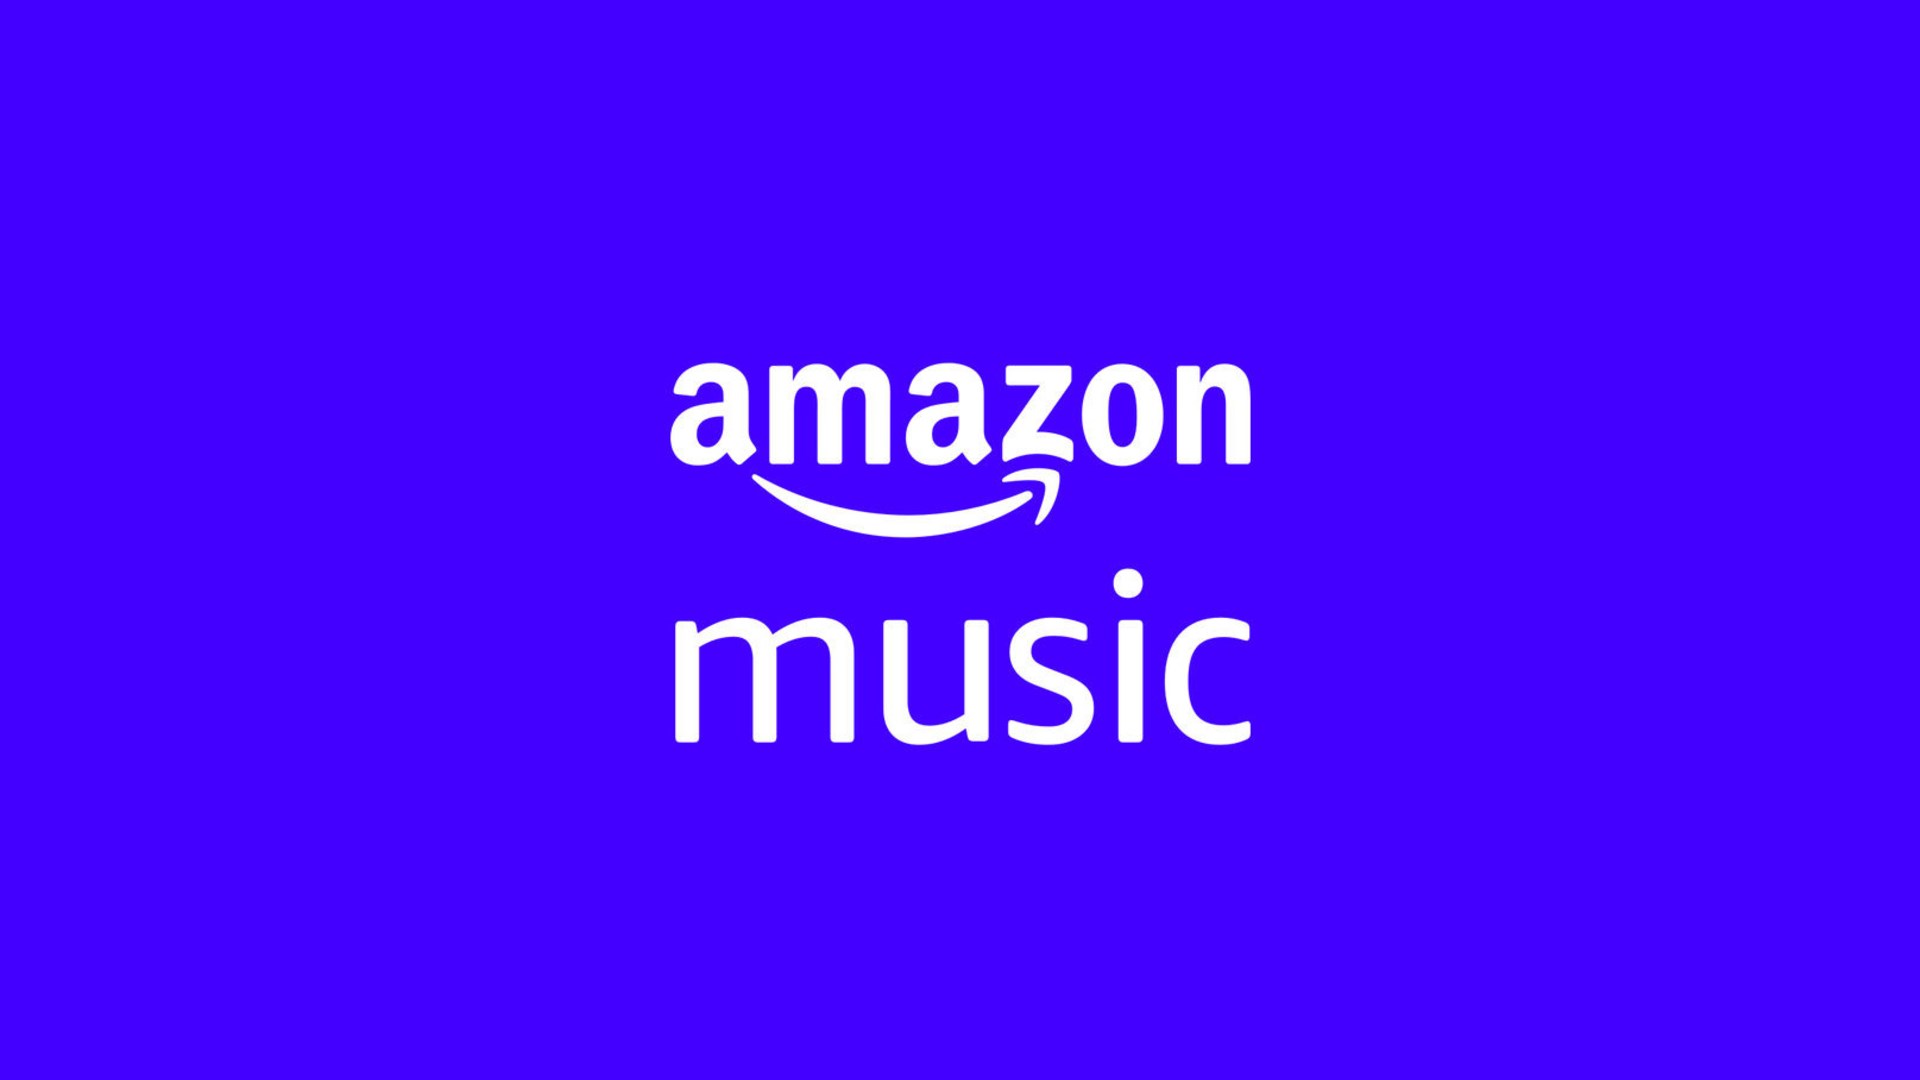 Amazon Music Unlimited: Popular Music App with a Wide Range of Features